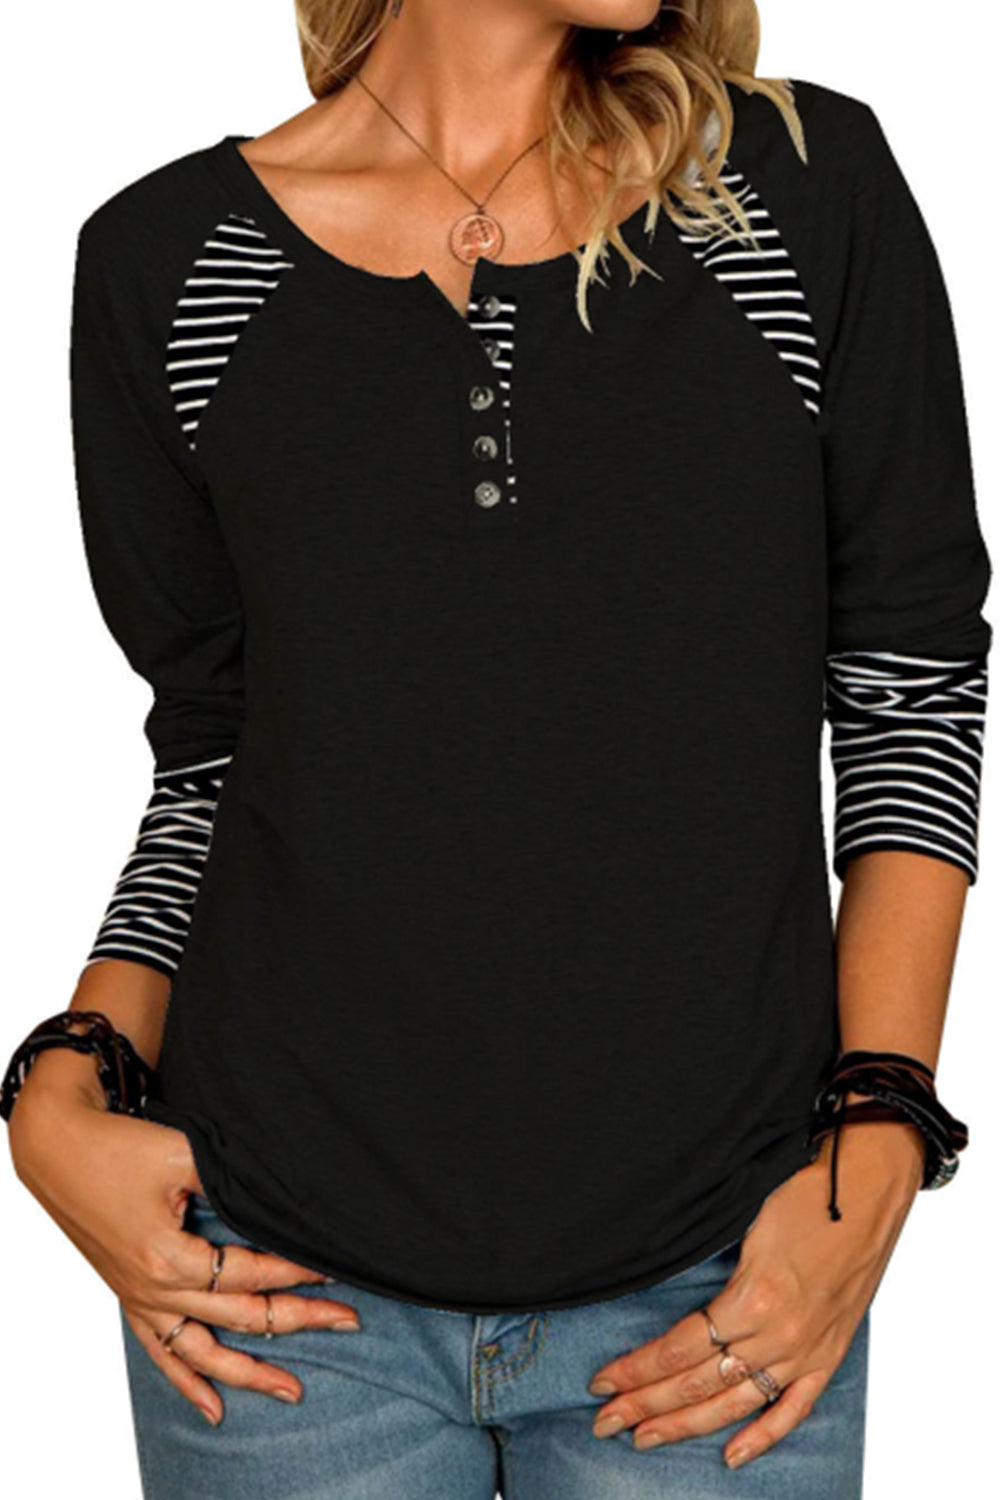 Women's Long Sleeve Printed Striped Casual T-Shirt Top